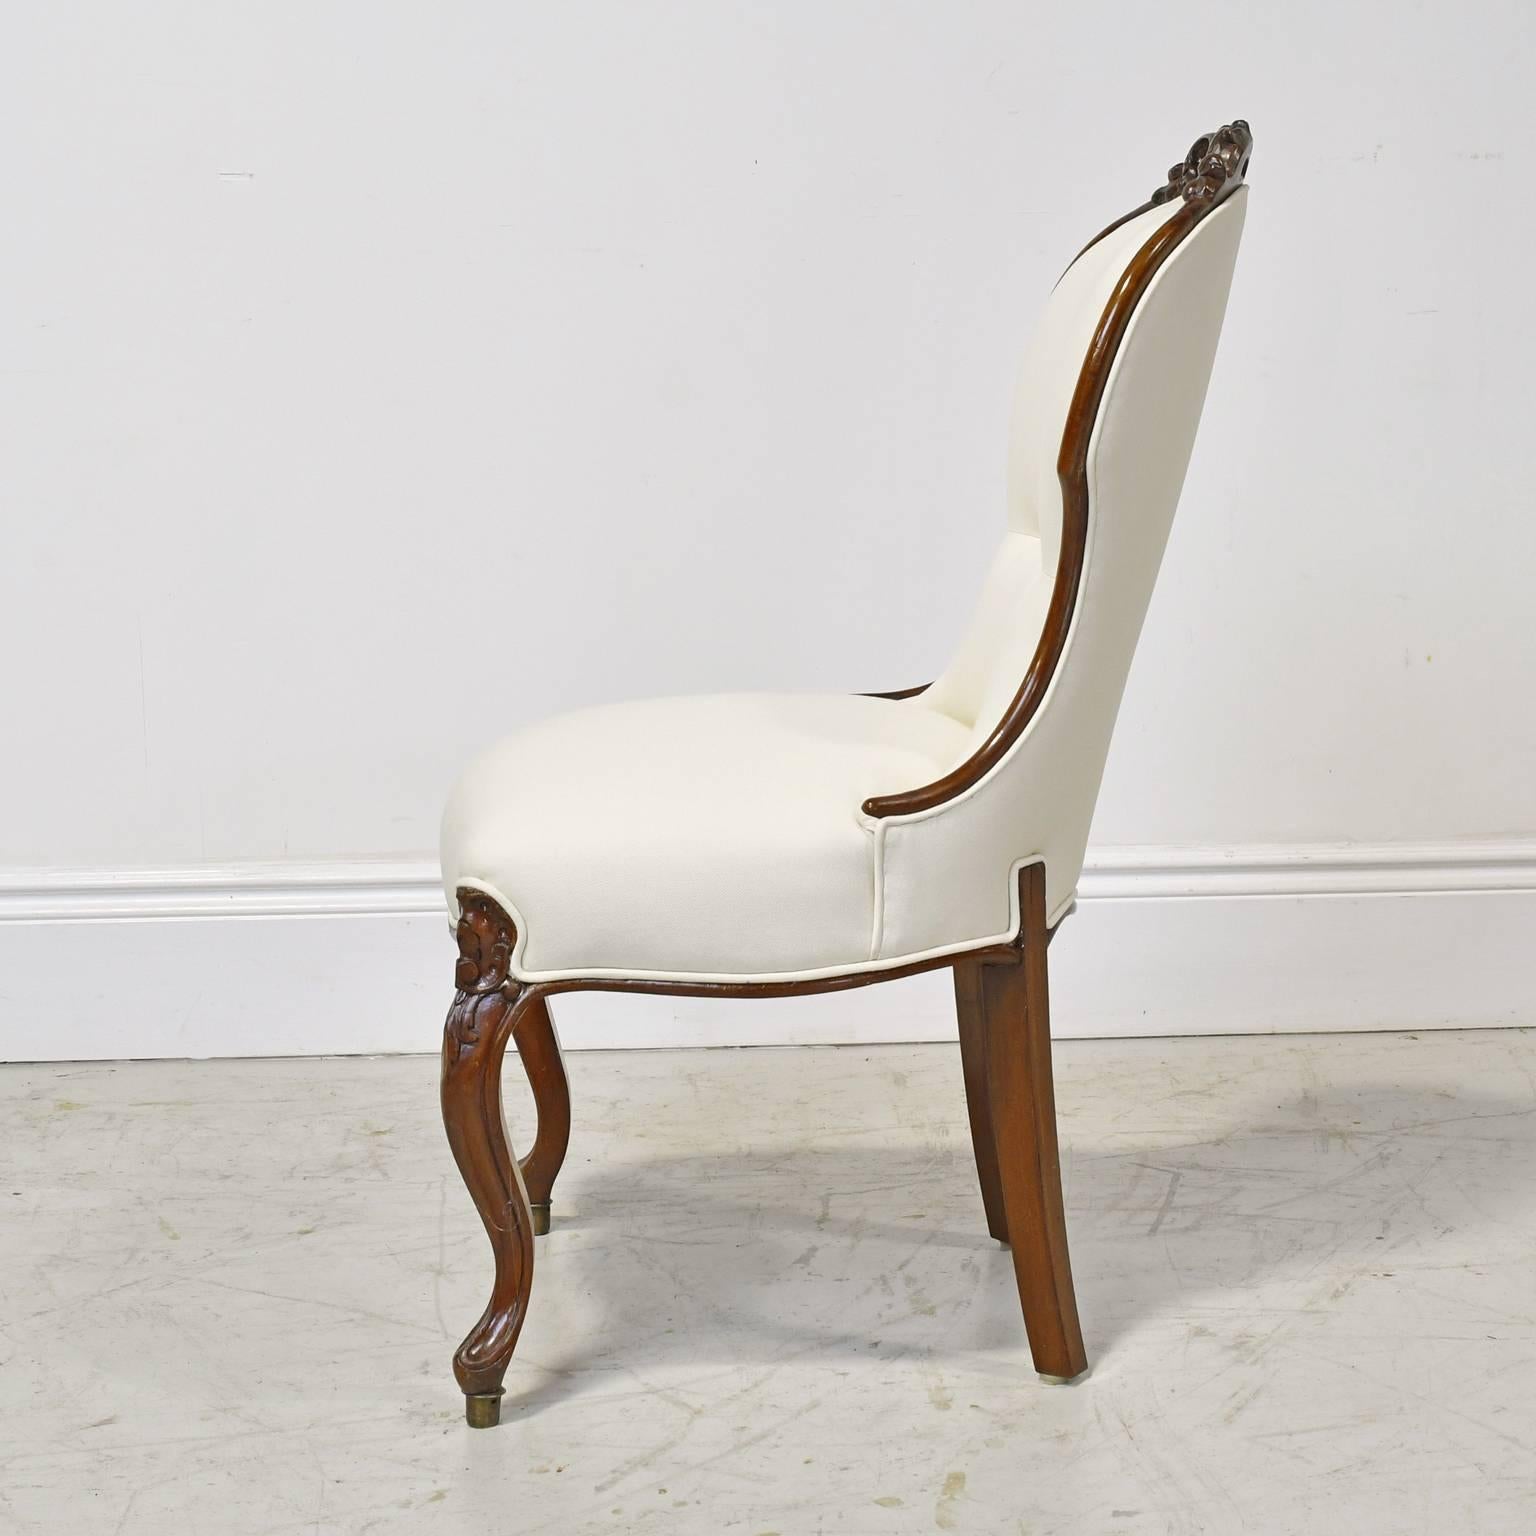 Louis Philippe Set of Six Mid-19th Century Dining Chairs with Upholstered Seat and Back